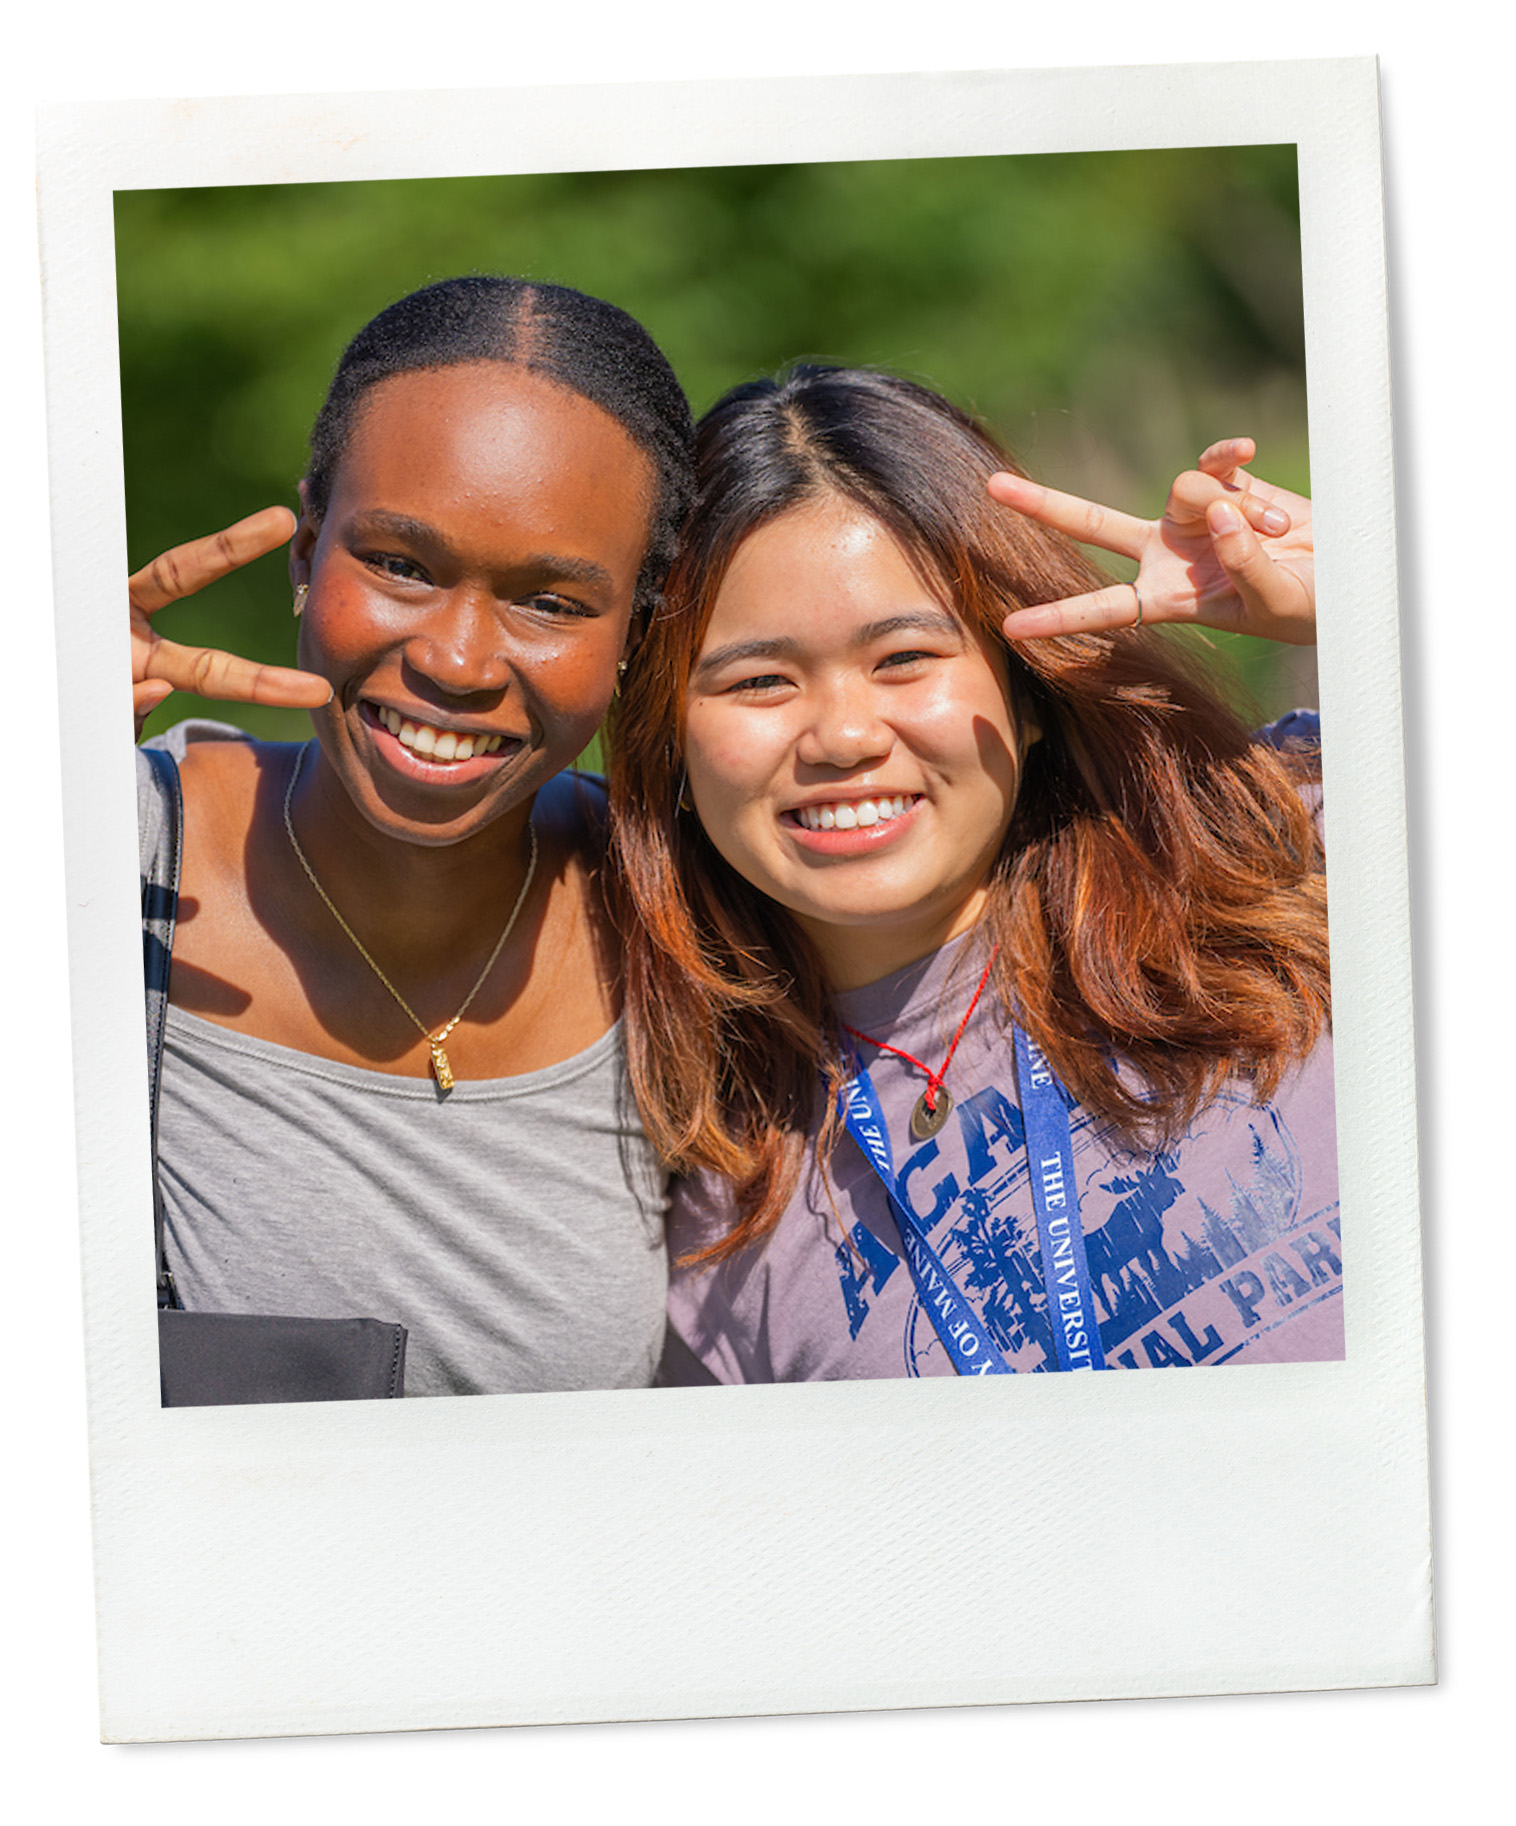 A polaroid of two students giving the peace sign